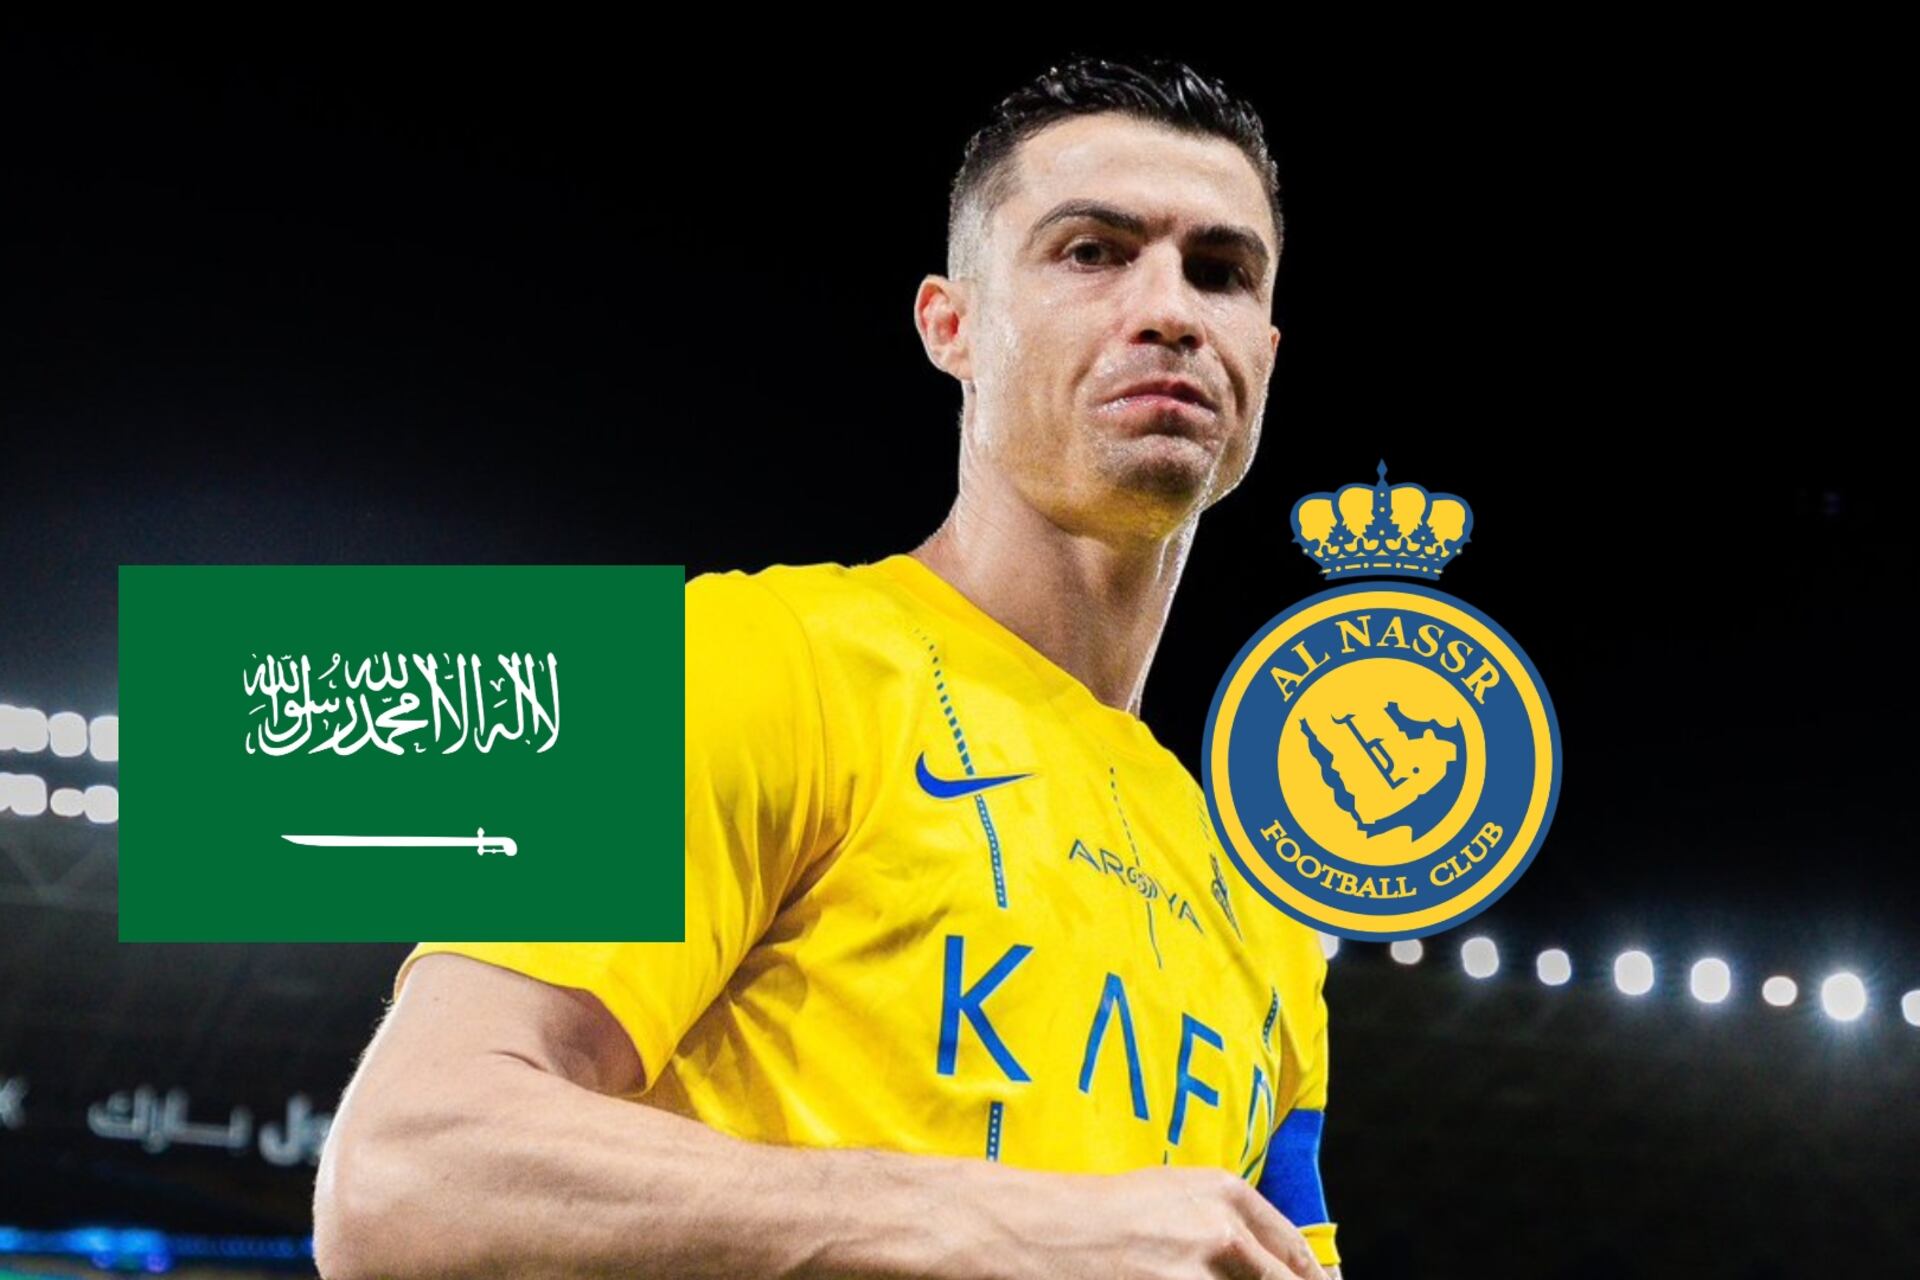 In Saudi they angered Cristiano again, the new procedure they would take with CR7 before his next game with Al Nassr